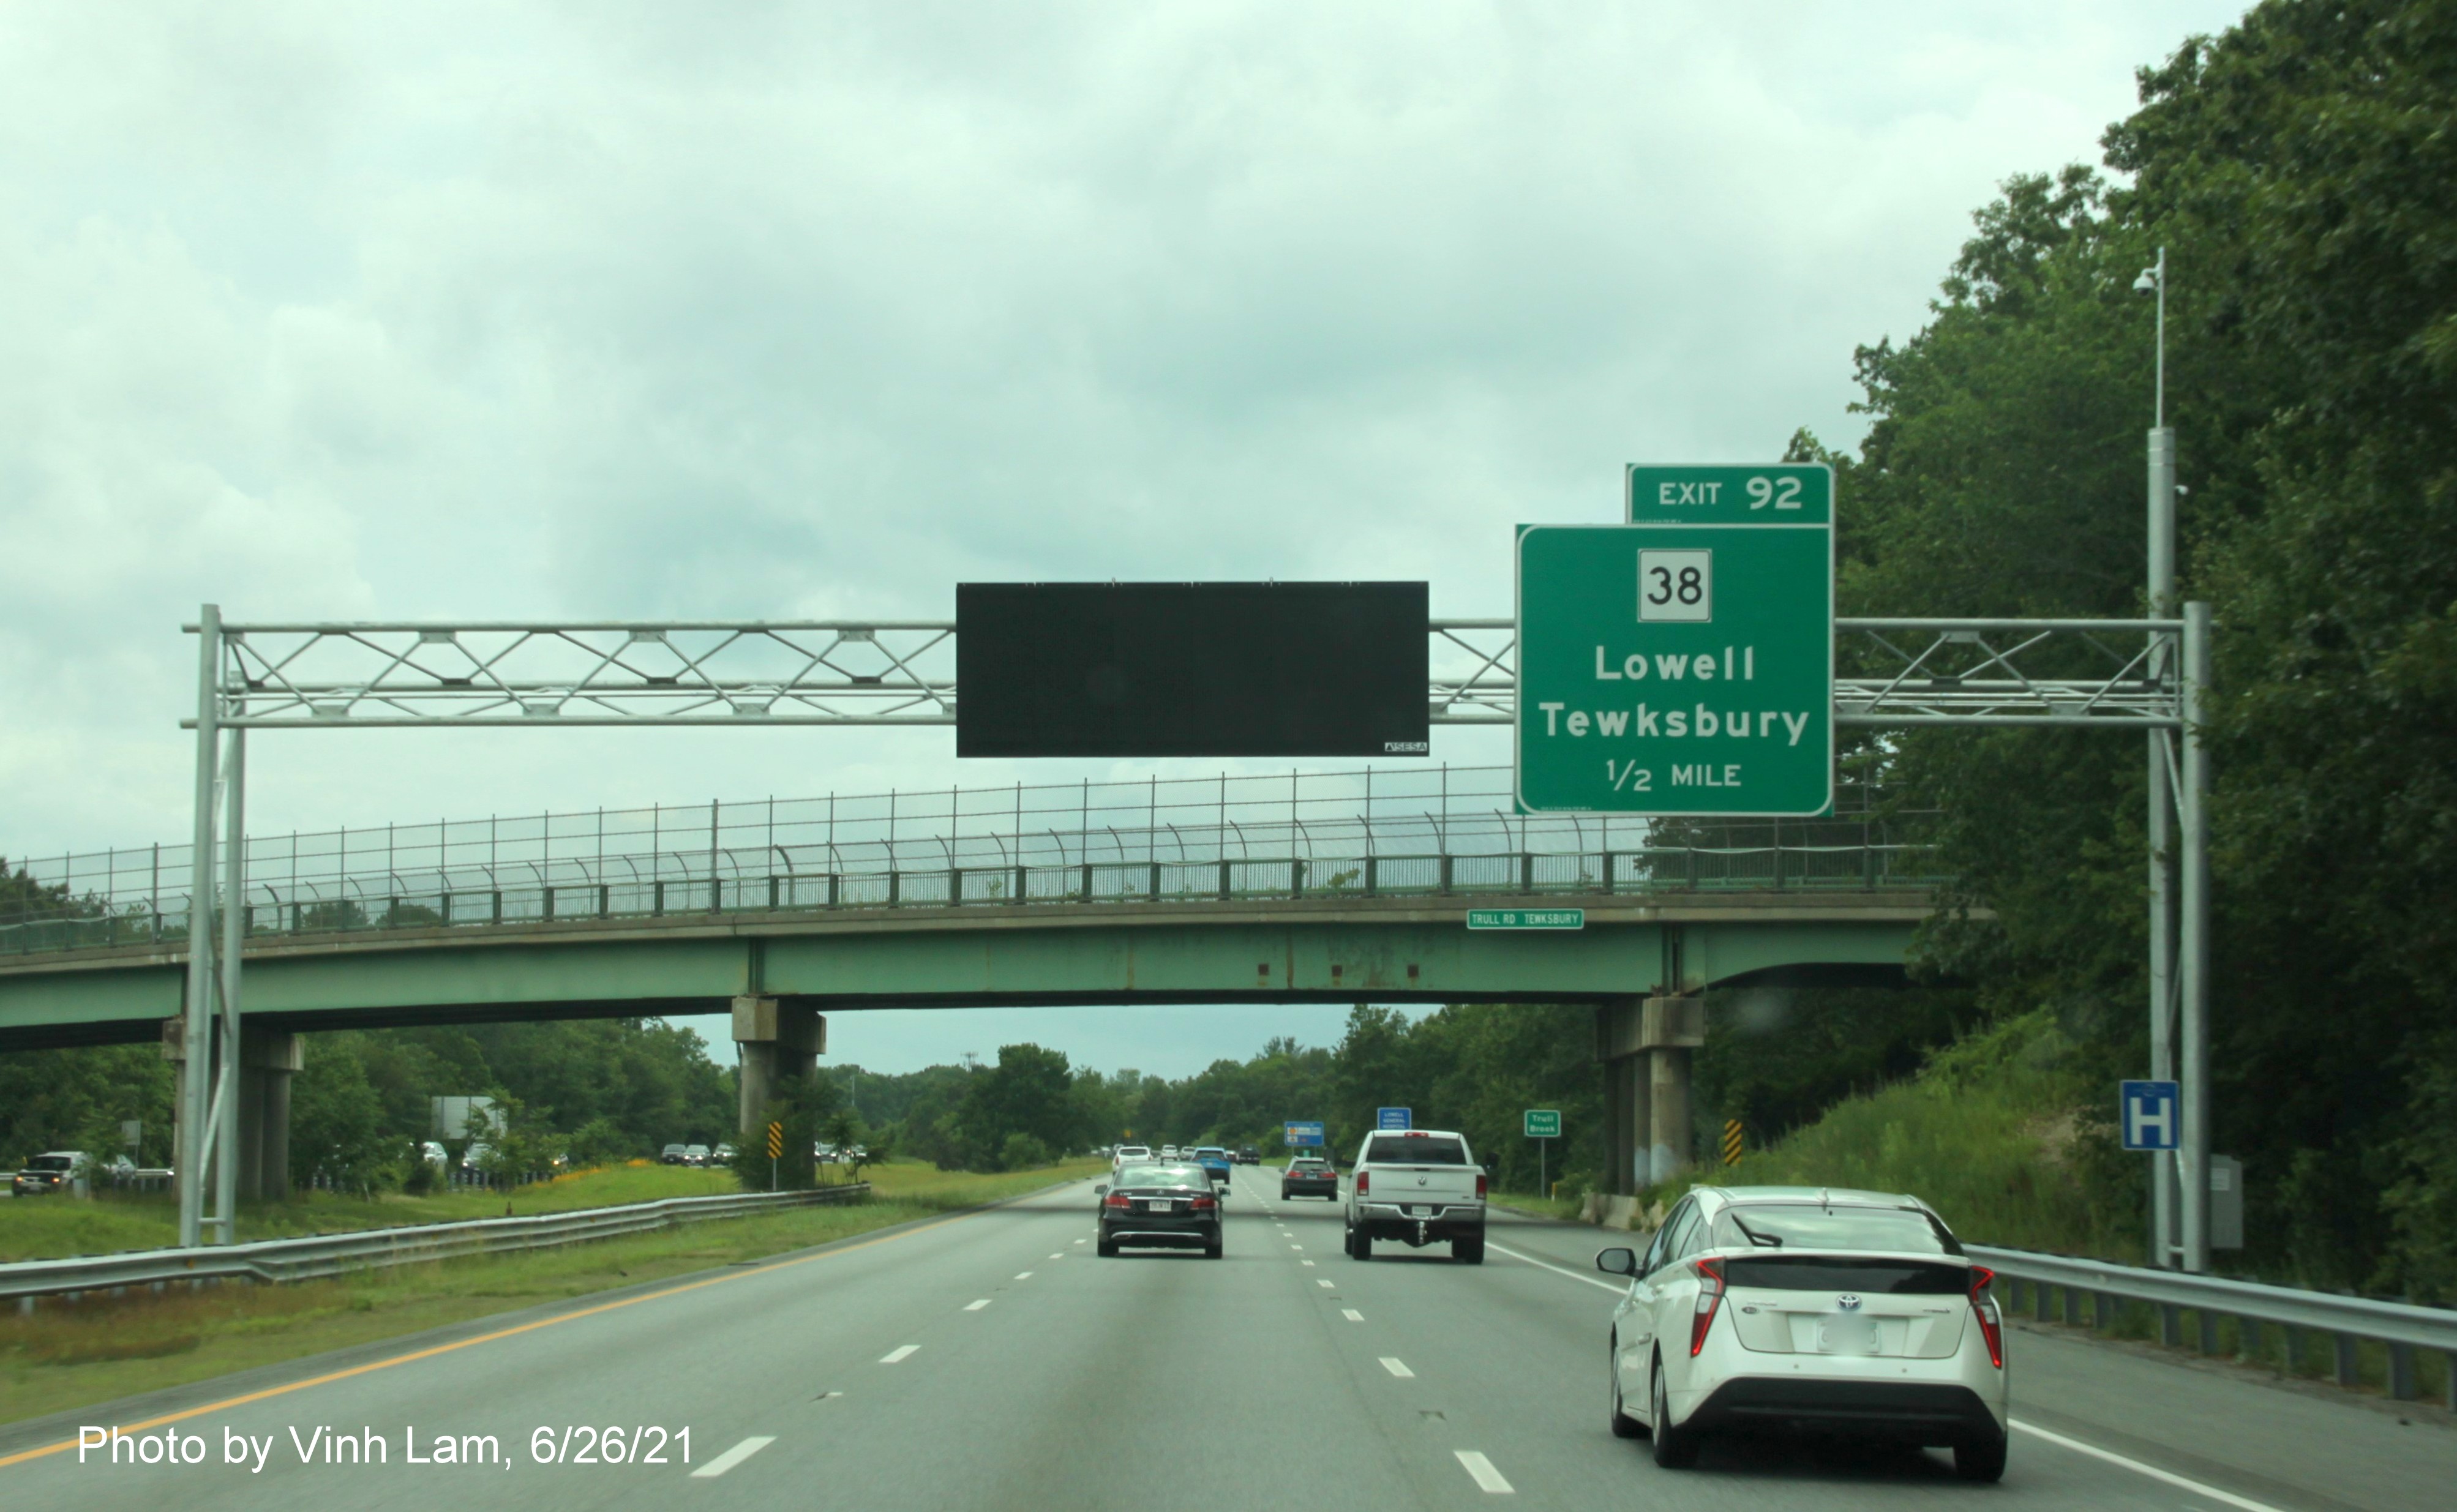 Image of 1/2 mile advance overhead sign for MA 38 exit with new milepost based exit number on I-495 South in Tewksbury, by Vinh Lam, June 2021